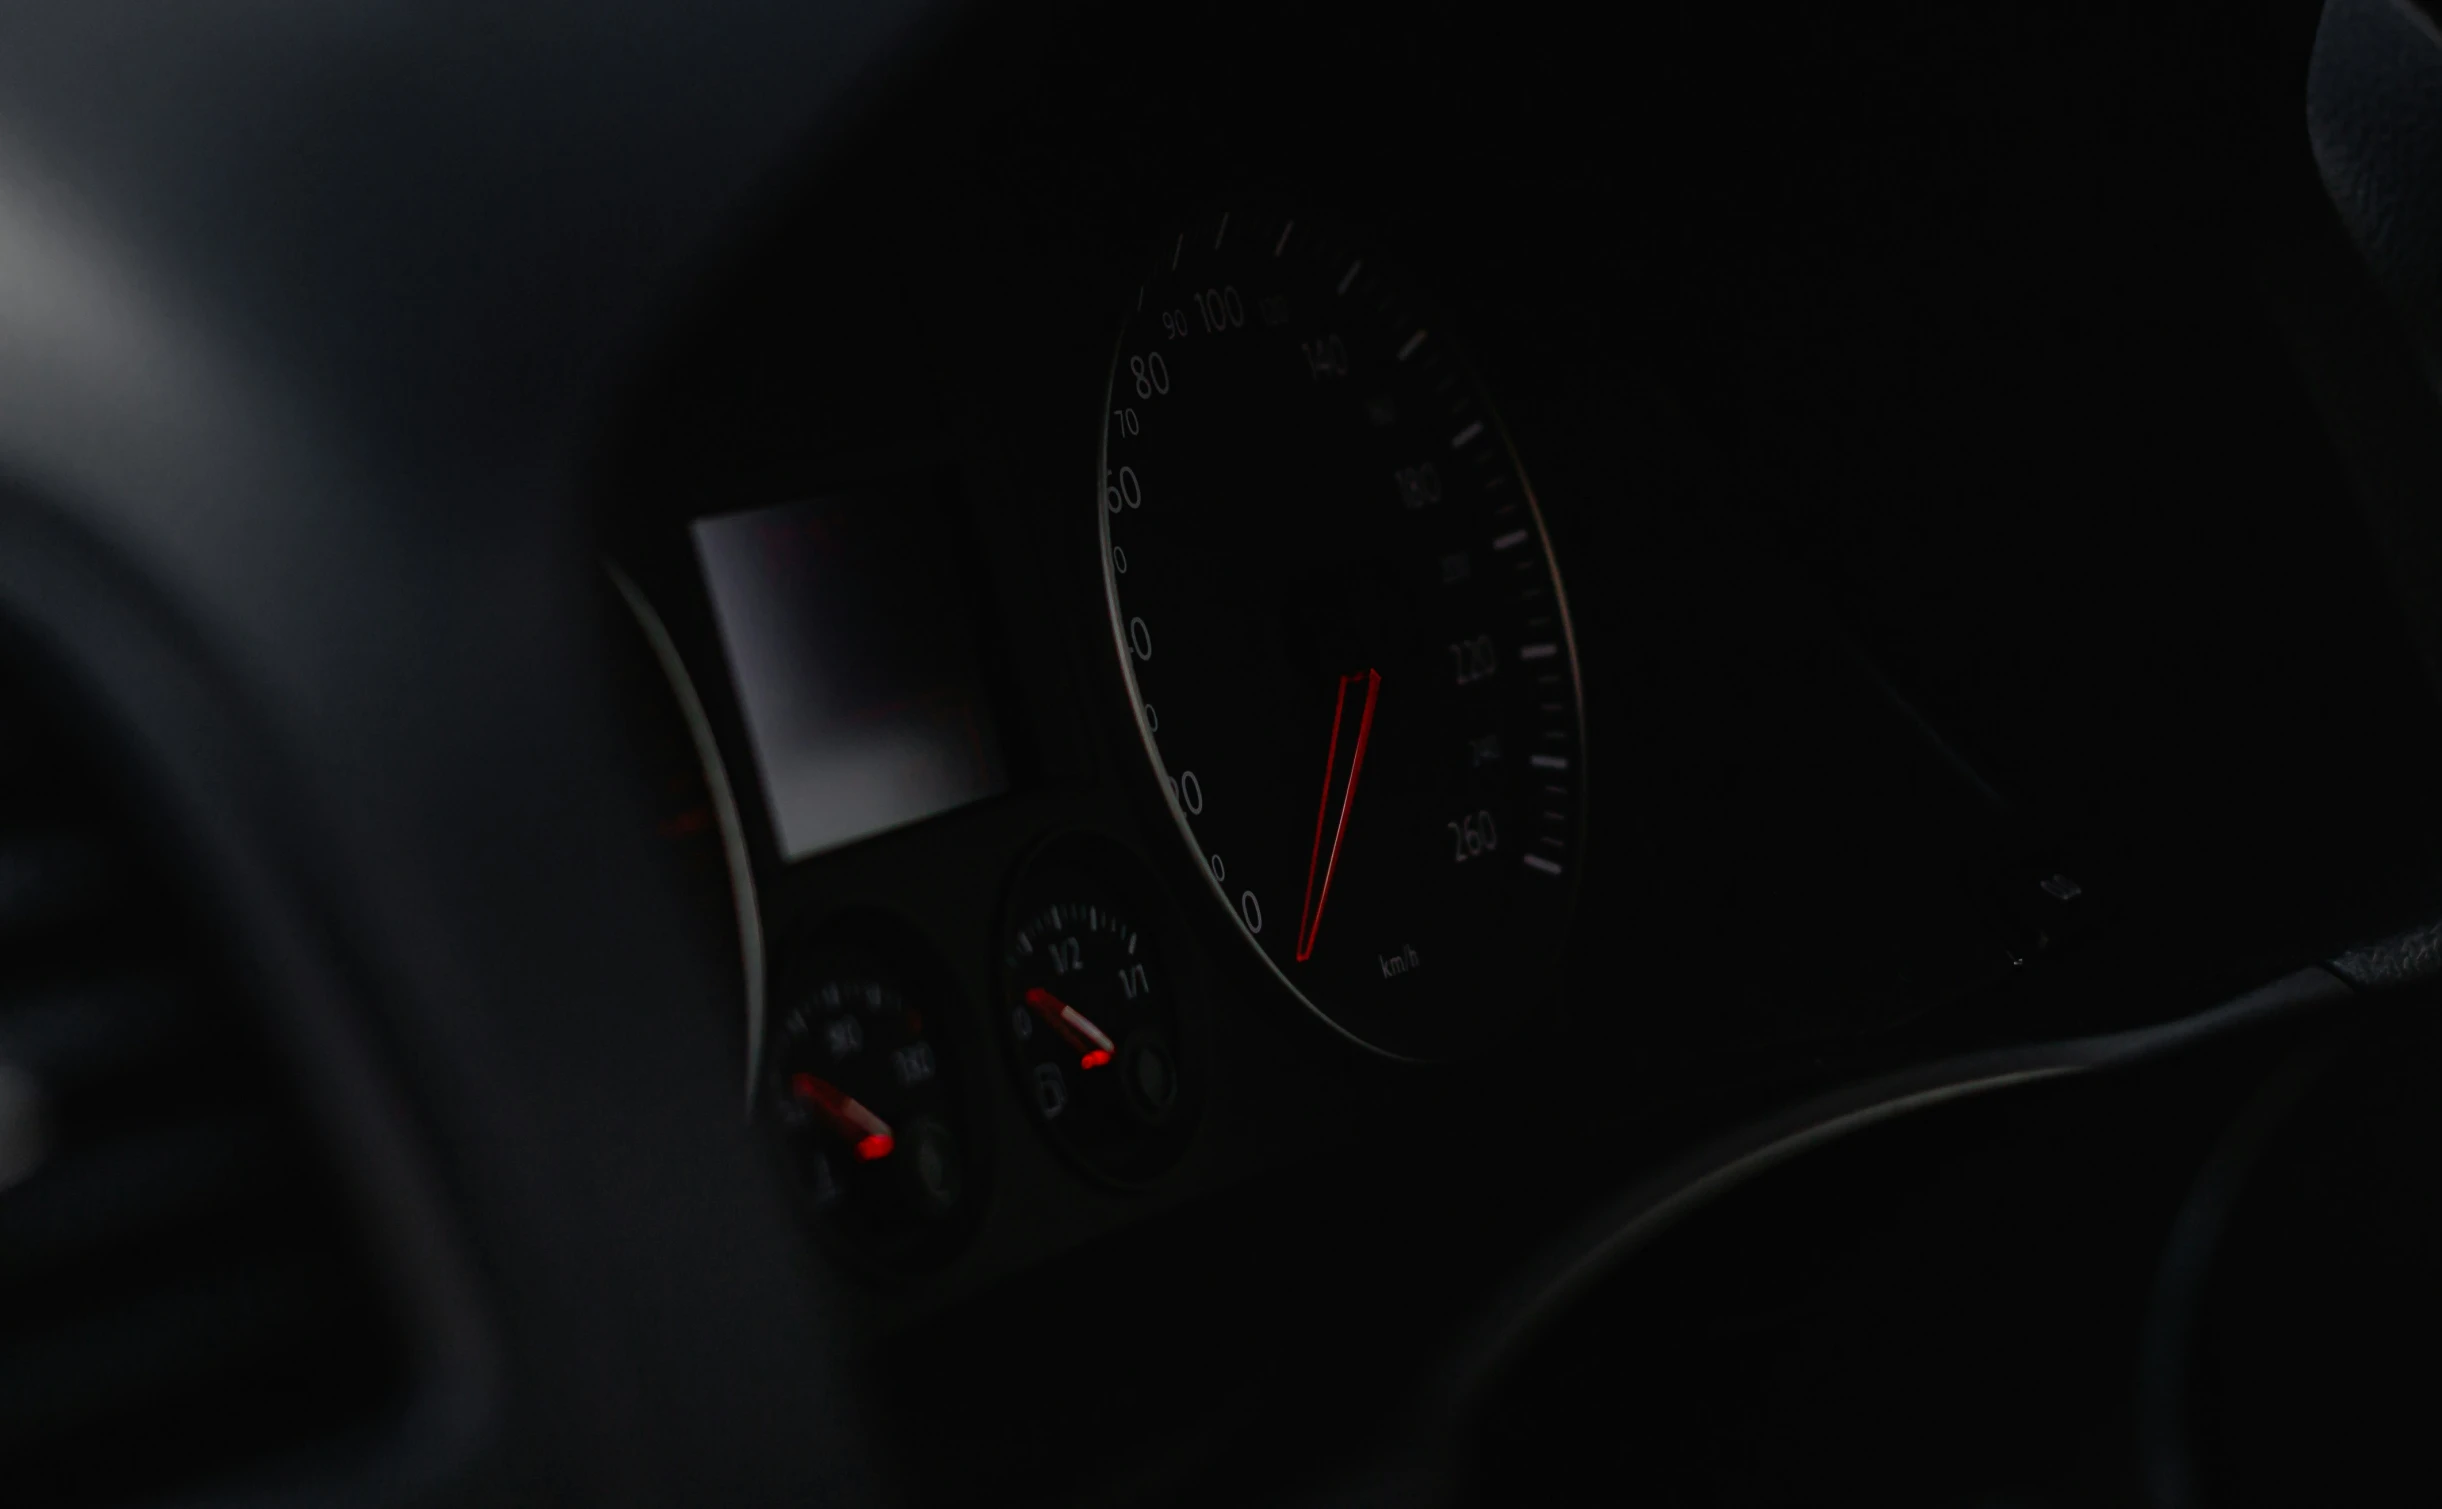 a close up view of a dashboard in the car